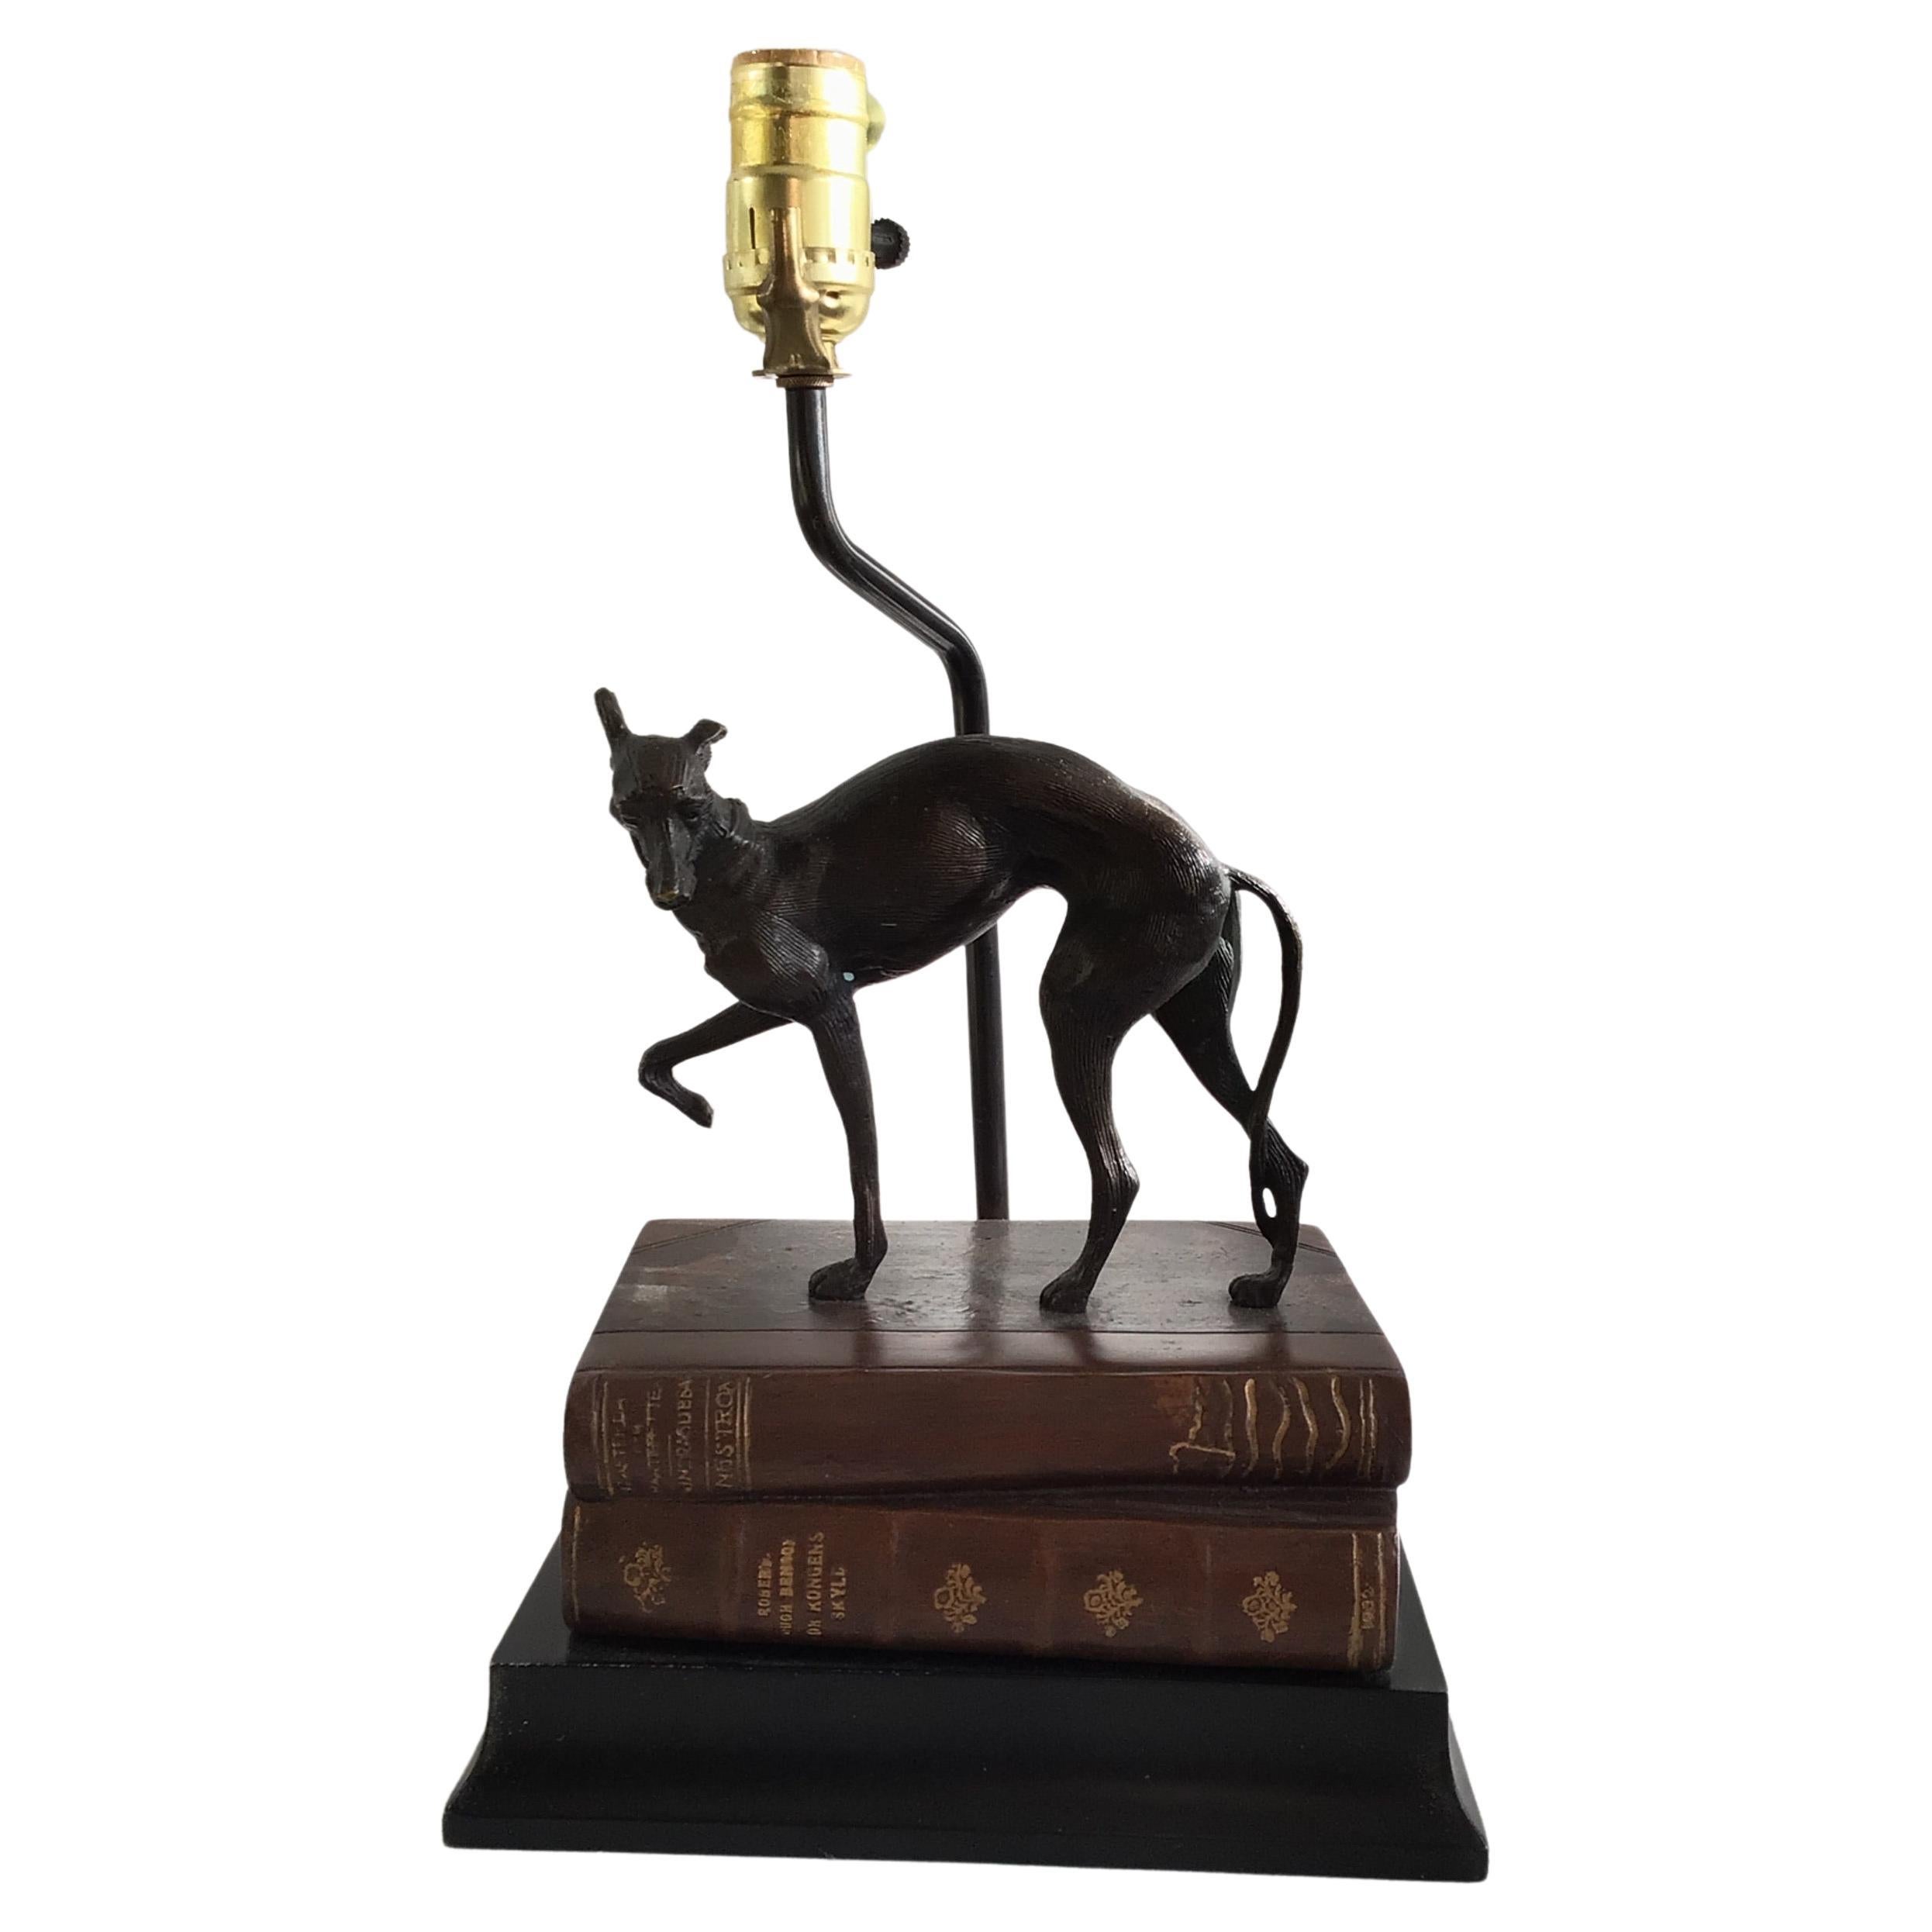 1970s Metal Whippet / Greyhound Dog Standing on Stack of Books Lamp